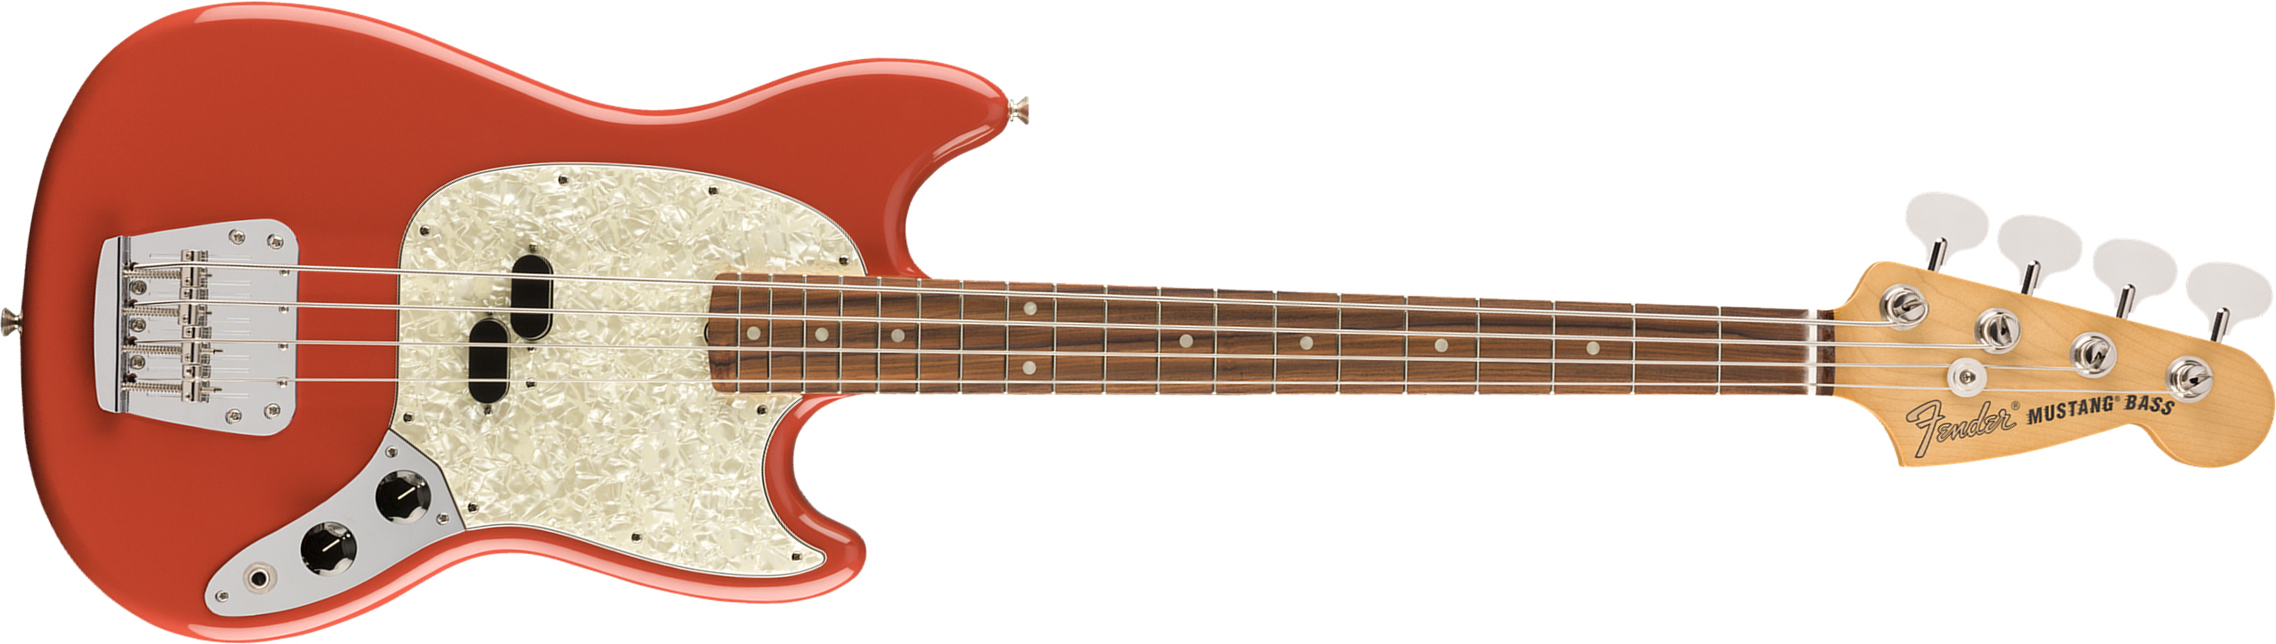 Fender Mustang Bass 60s Vintera Vintage Mex Pf - Fiesta Red - Electric bass for kids - Main picture